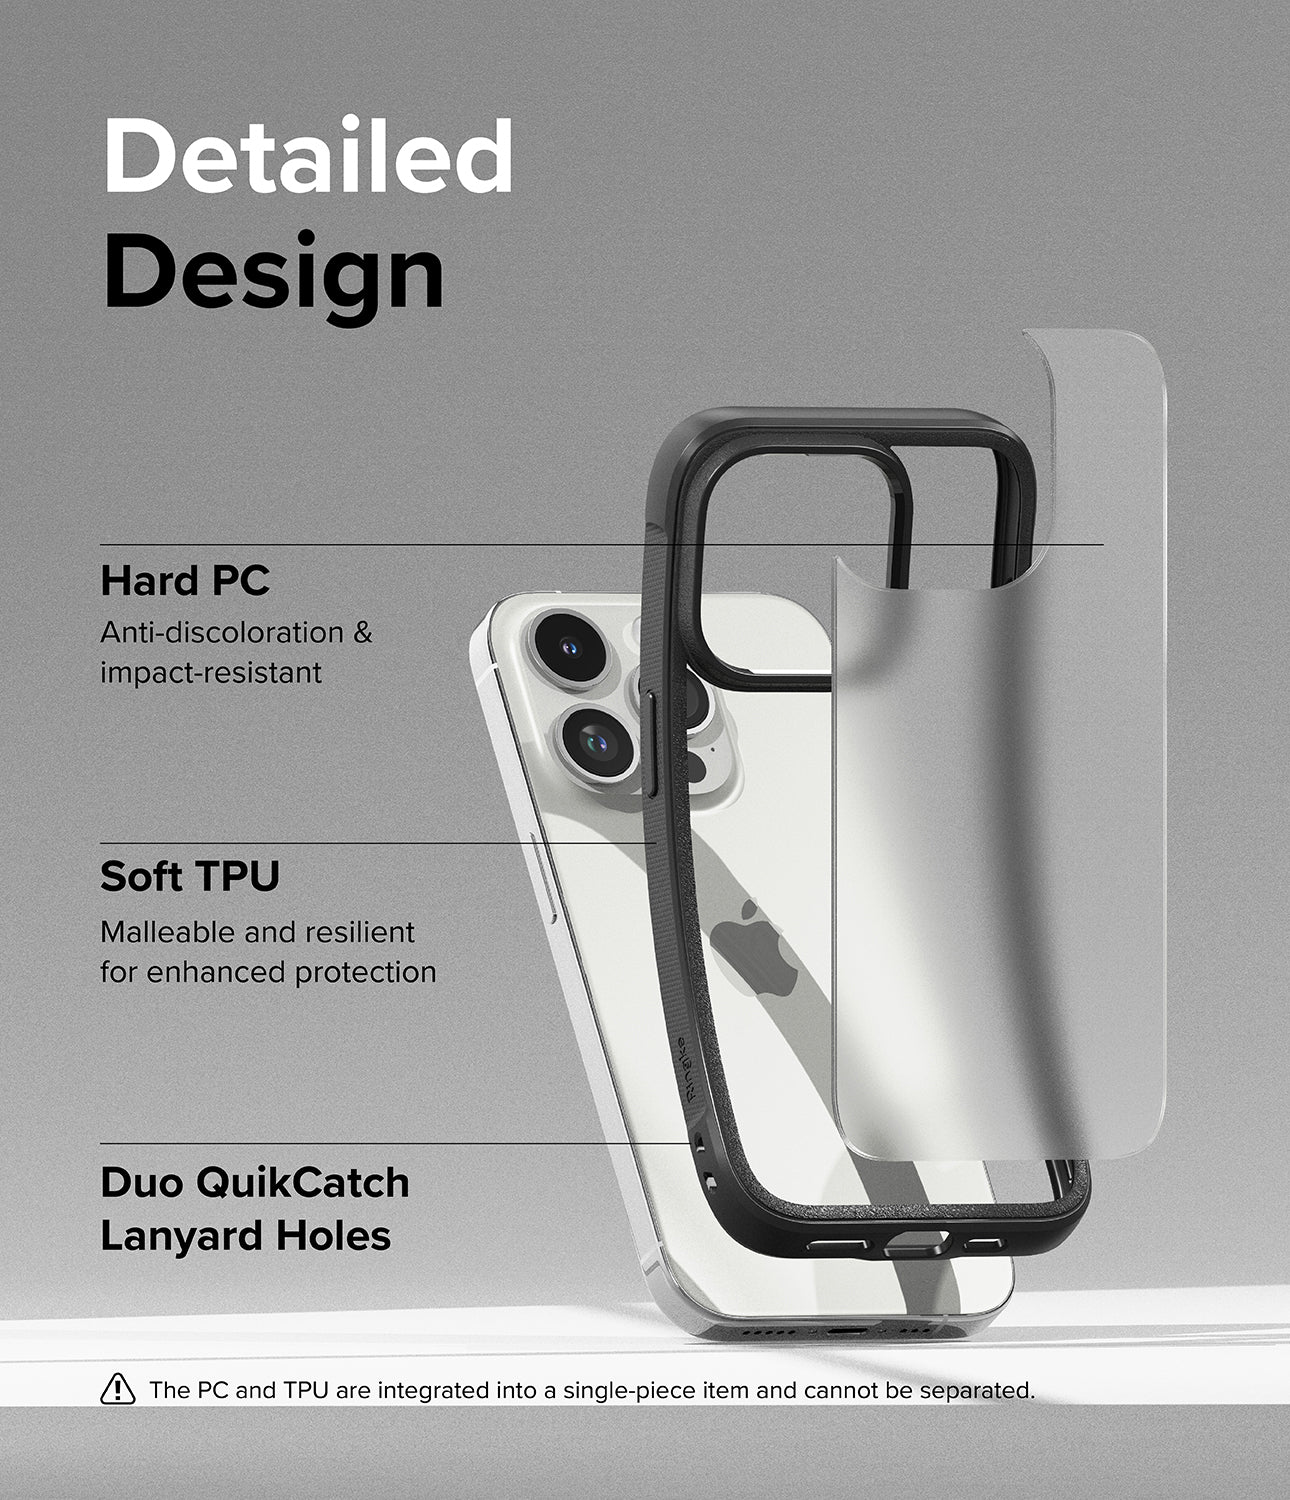 iPhone 15 Pro Max Case | Fusion Bold Matte Black - Detailed Design. Anti-discoloration and impact-resistant with Hard PC. Malleable and resilient for enhanced protection with Soft TPU. Duo QuikCatch Lanyard Holes